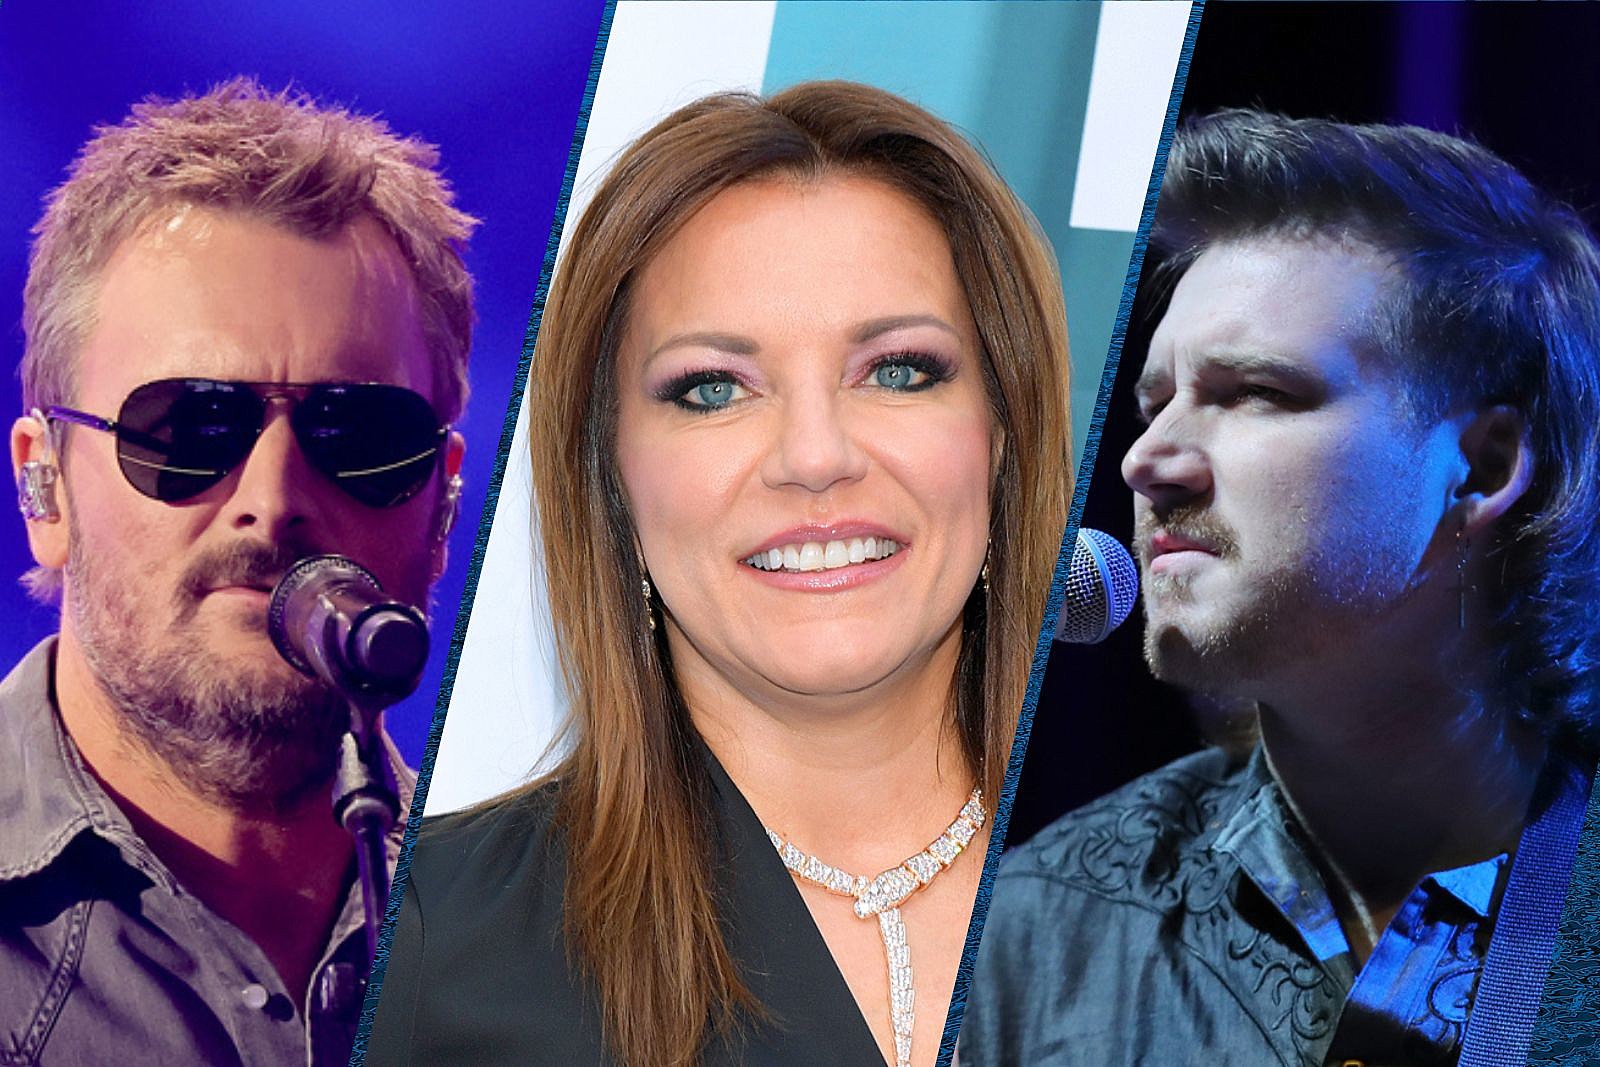 15 Country Legends Who’ve Never Won a Grammy Award, Ranked